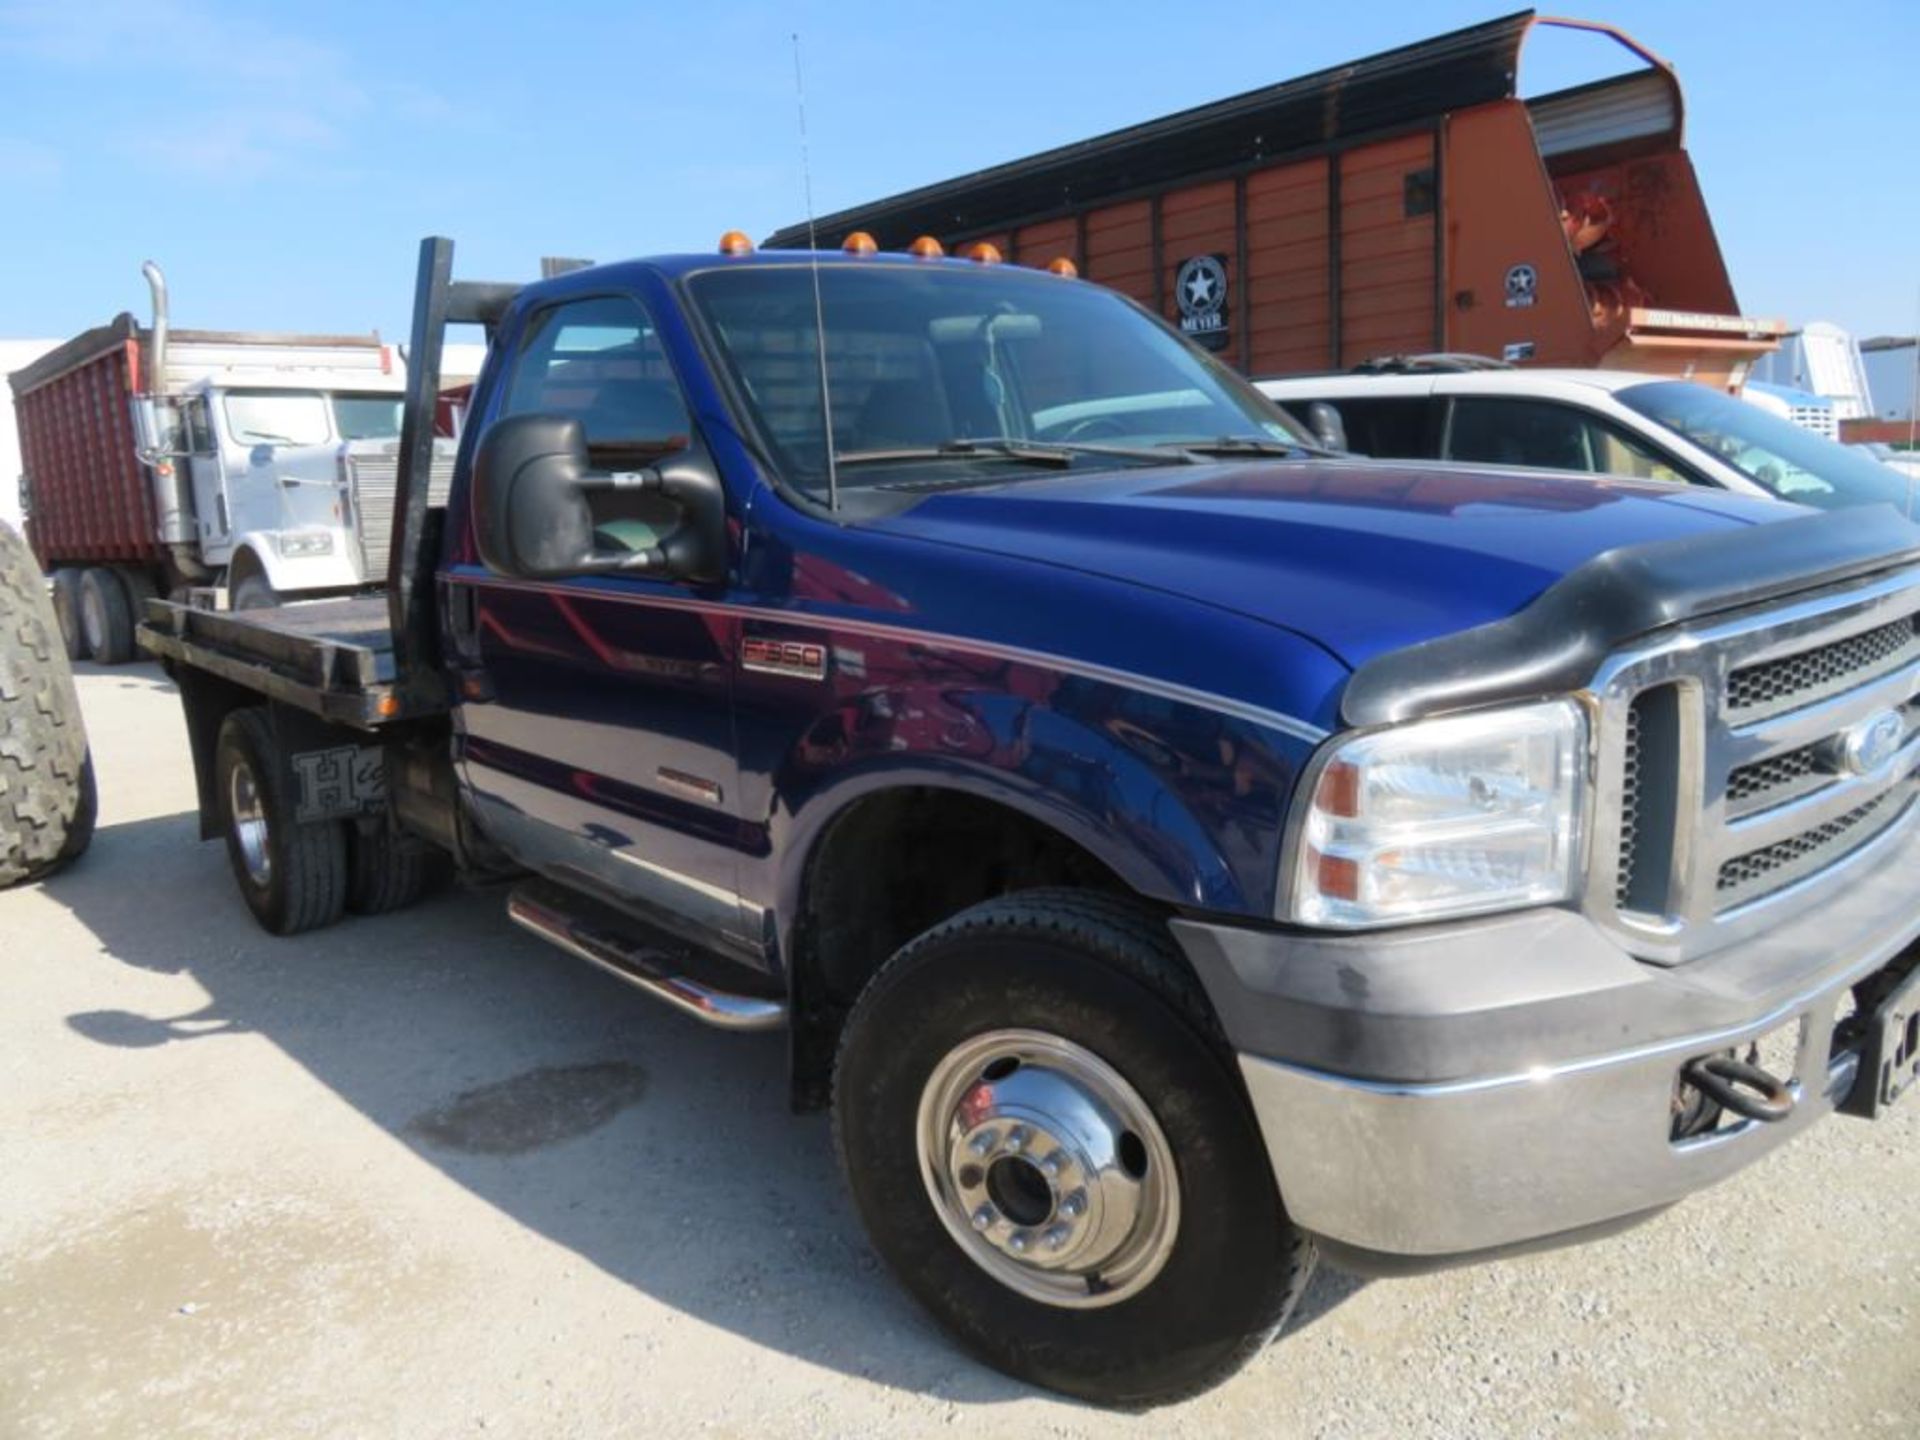 2000 F350 Reg Cab Dually Flatbed (title) 4x4, 6sp 260,100 miles, 7.3 Diesel New Transmission - Image 5 of 9